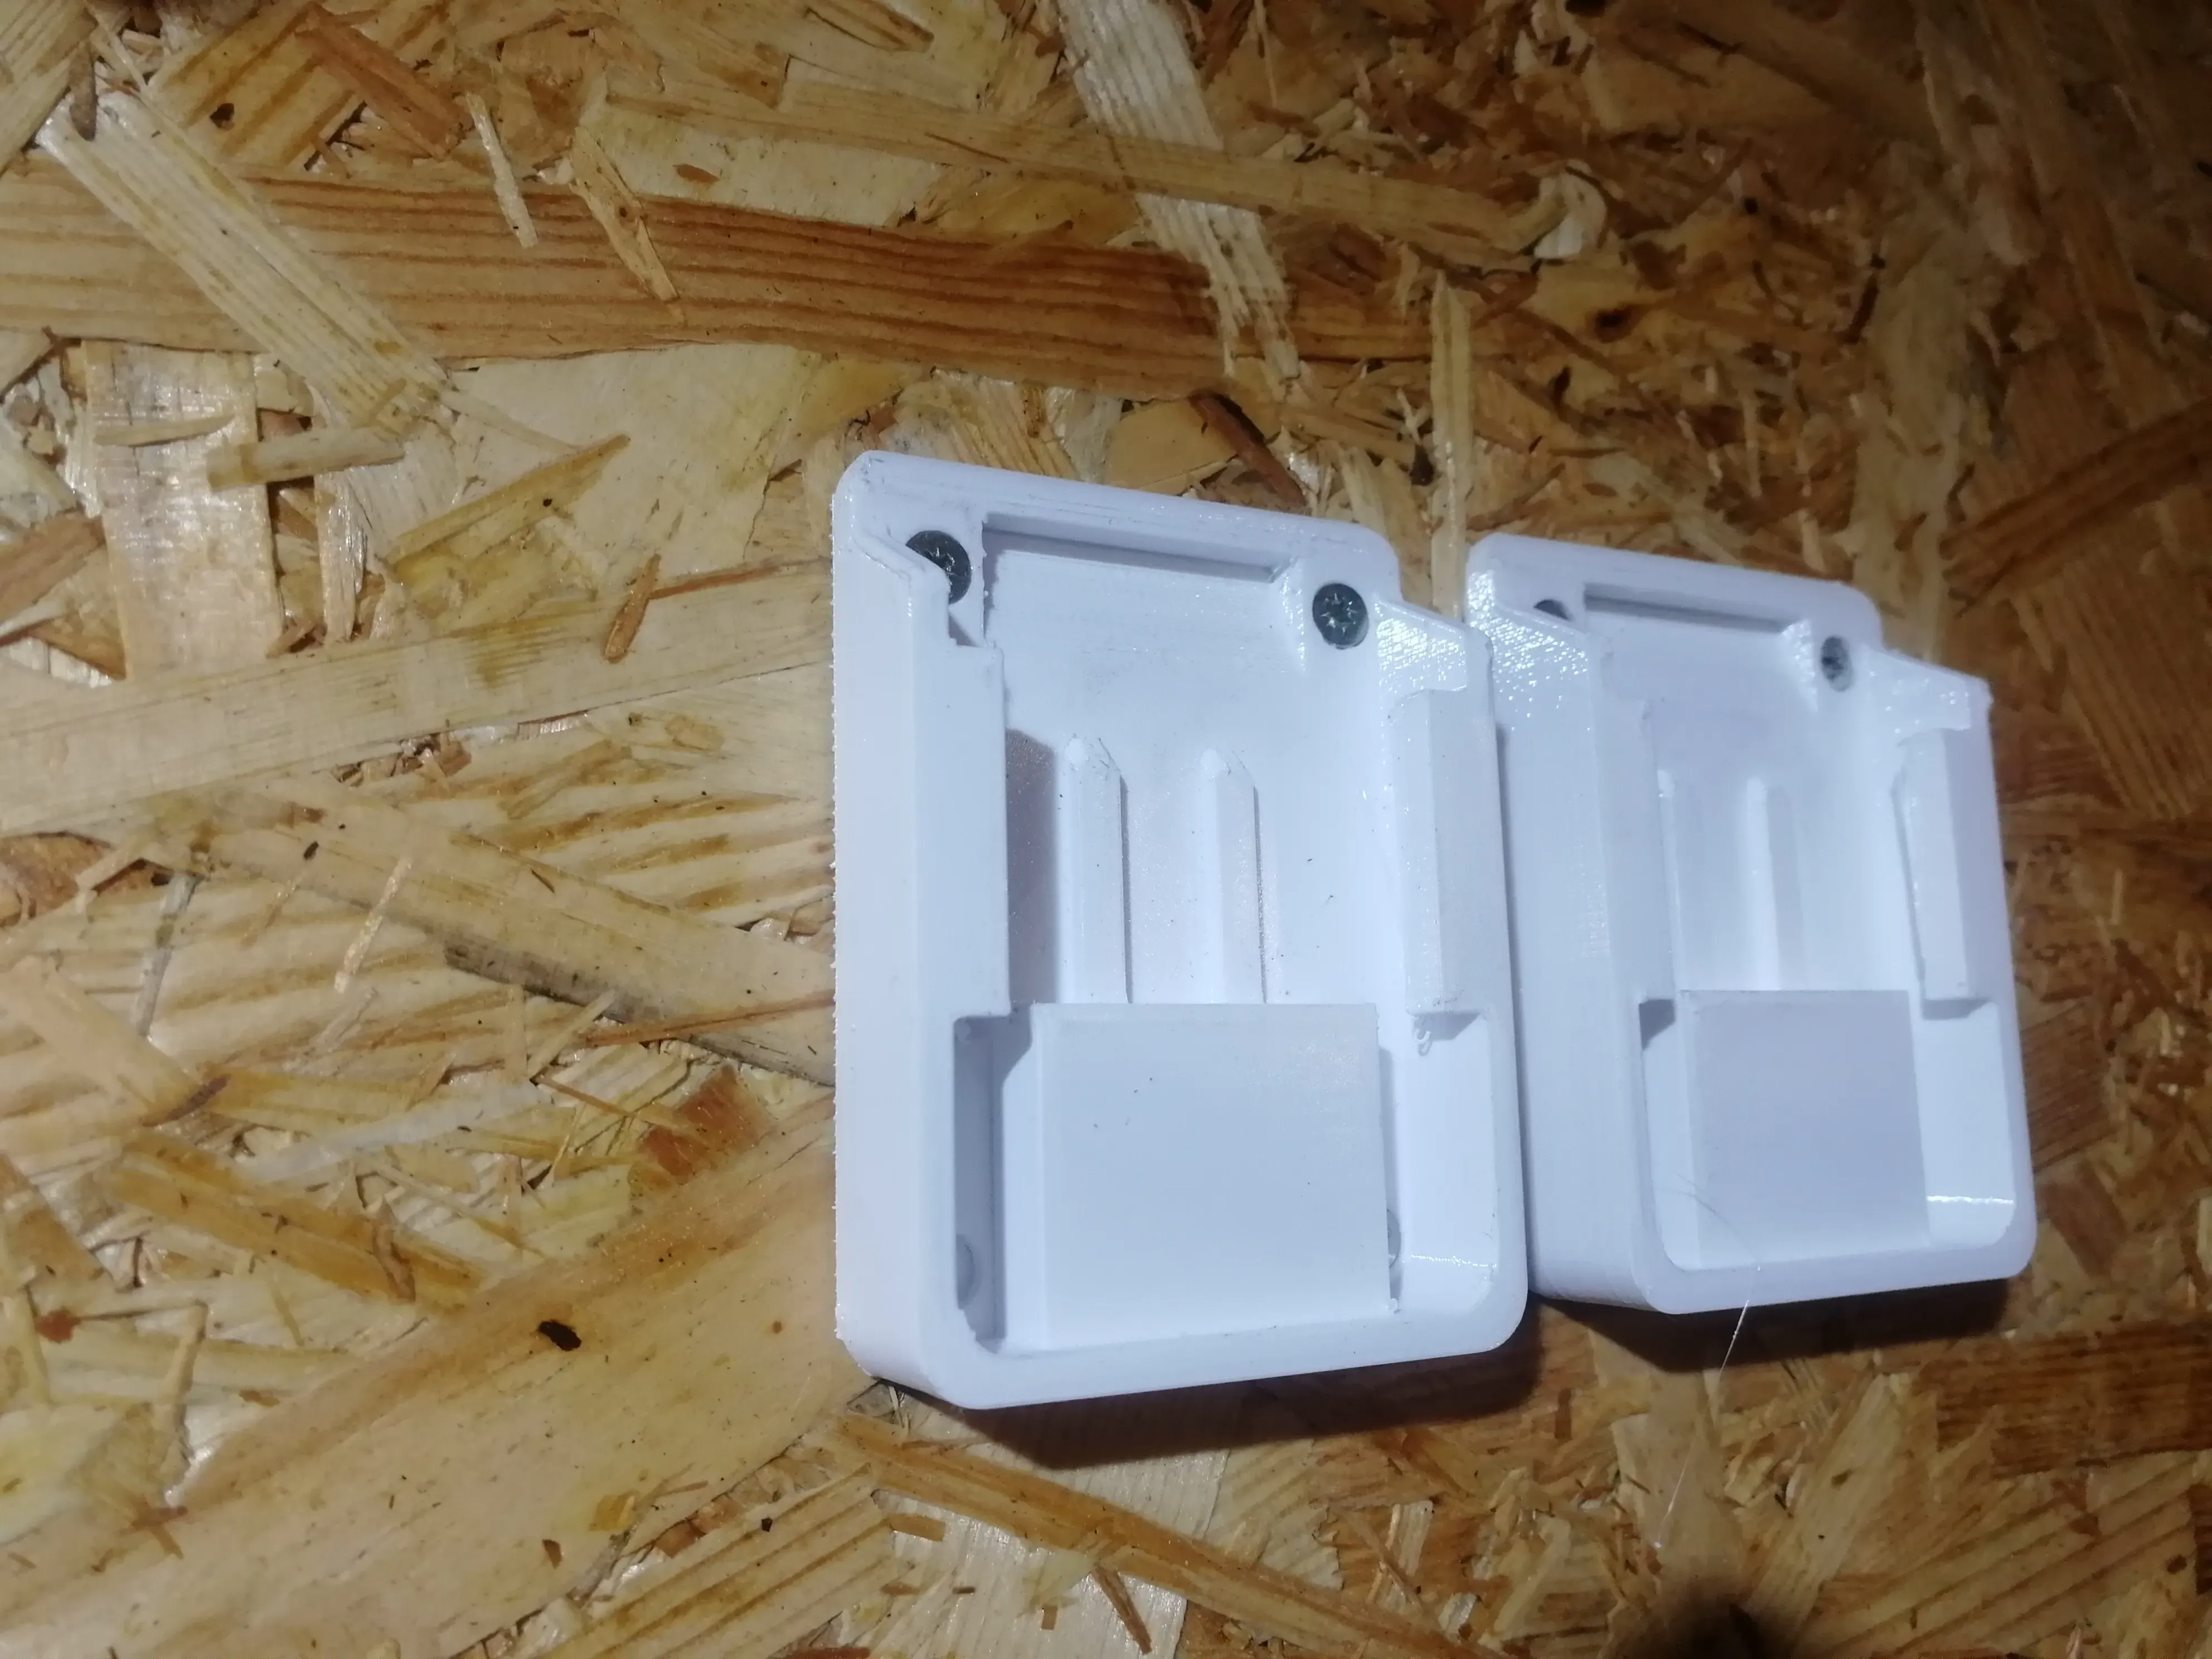 bosch and makita battery wall mount holders